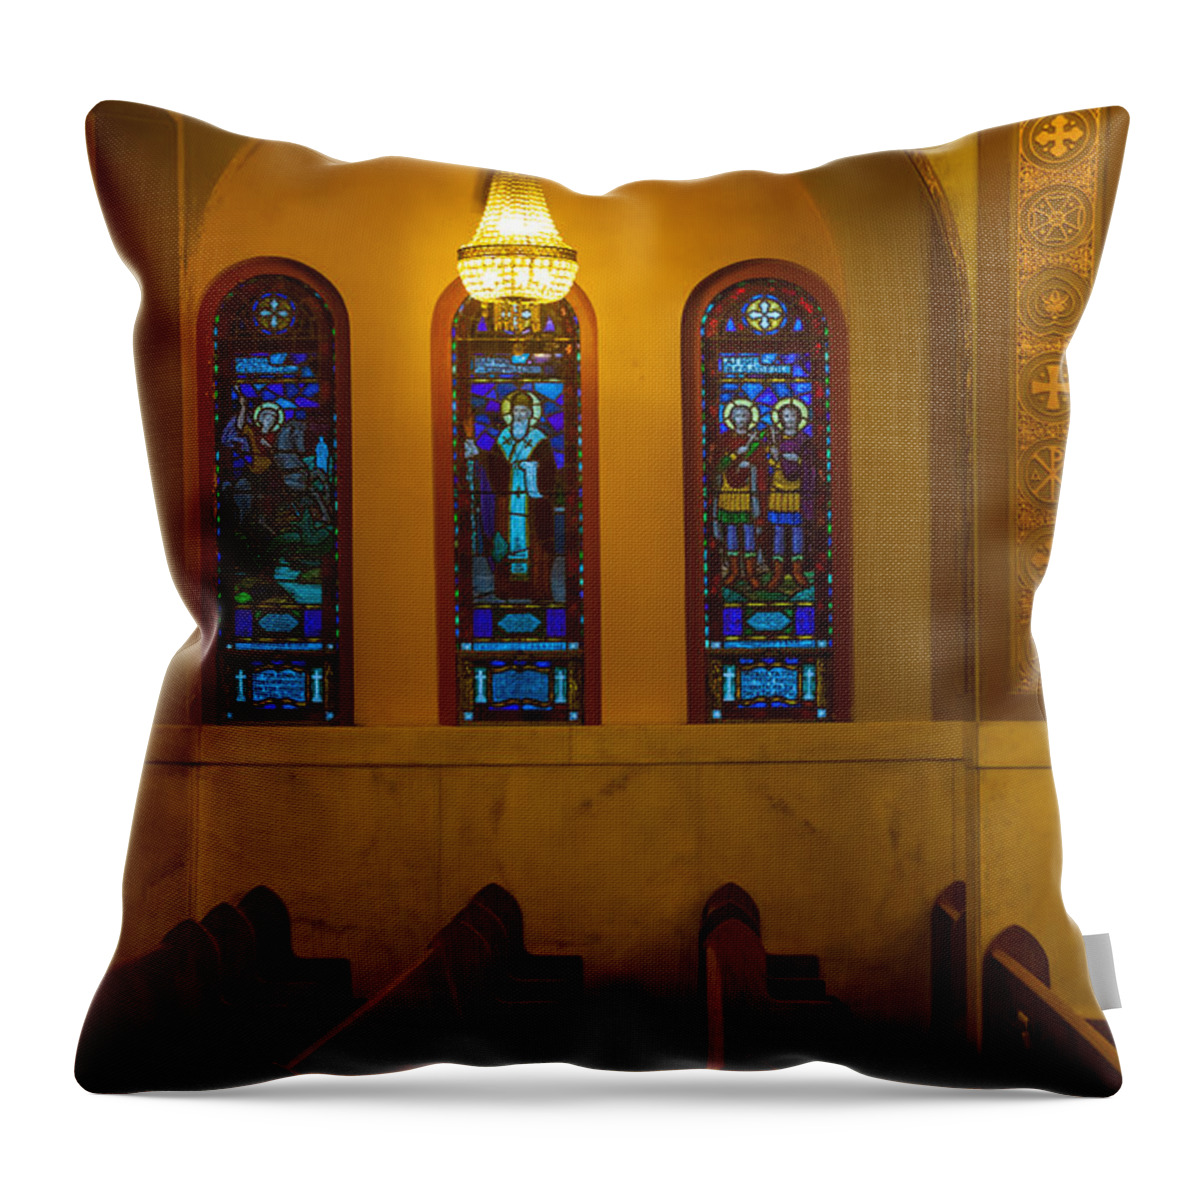 1948 Throw Pillow featuring the photograph Stained Glass Windows at St Sophia by Ed Gleichman